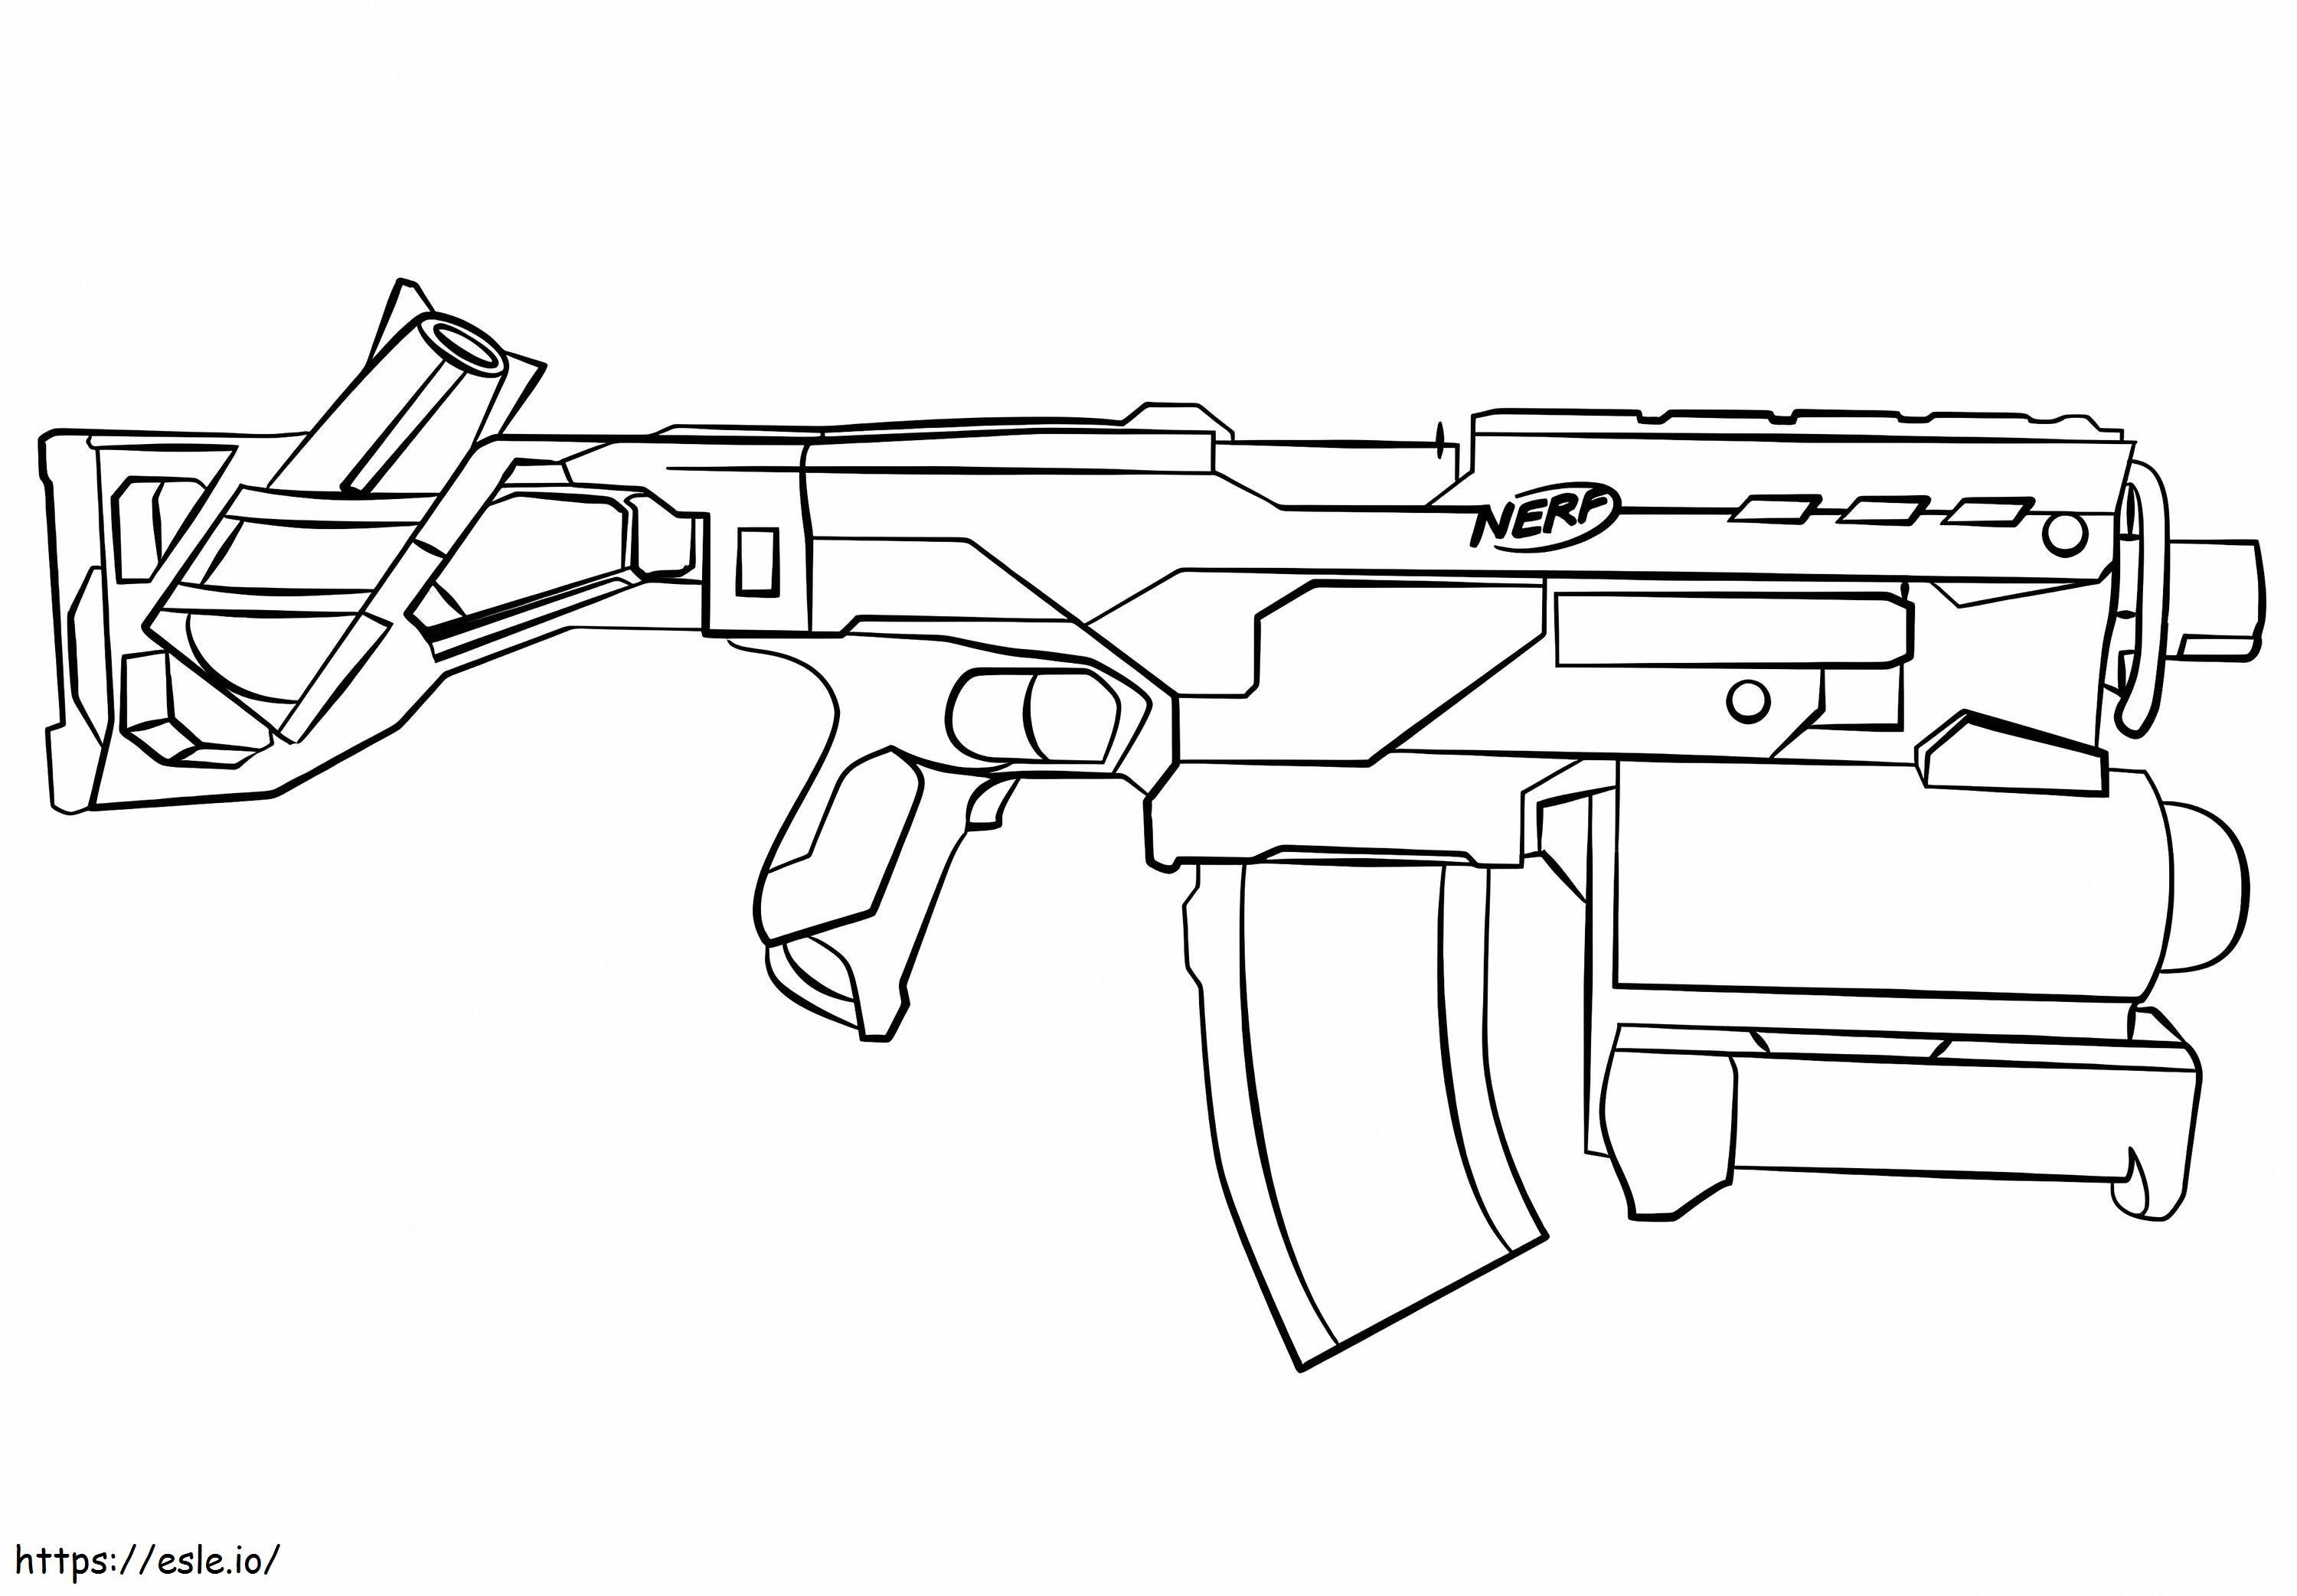 Awesome Nerf Gun coloring page